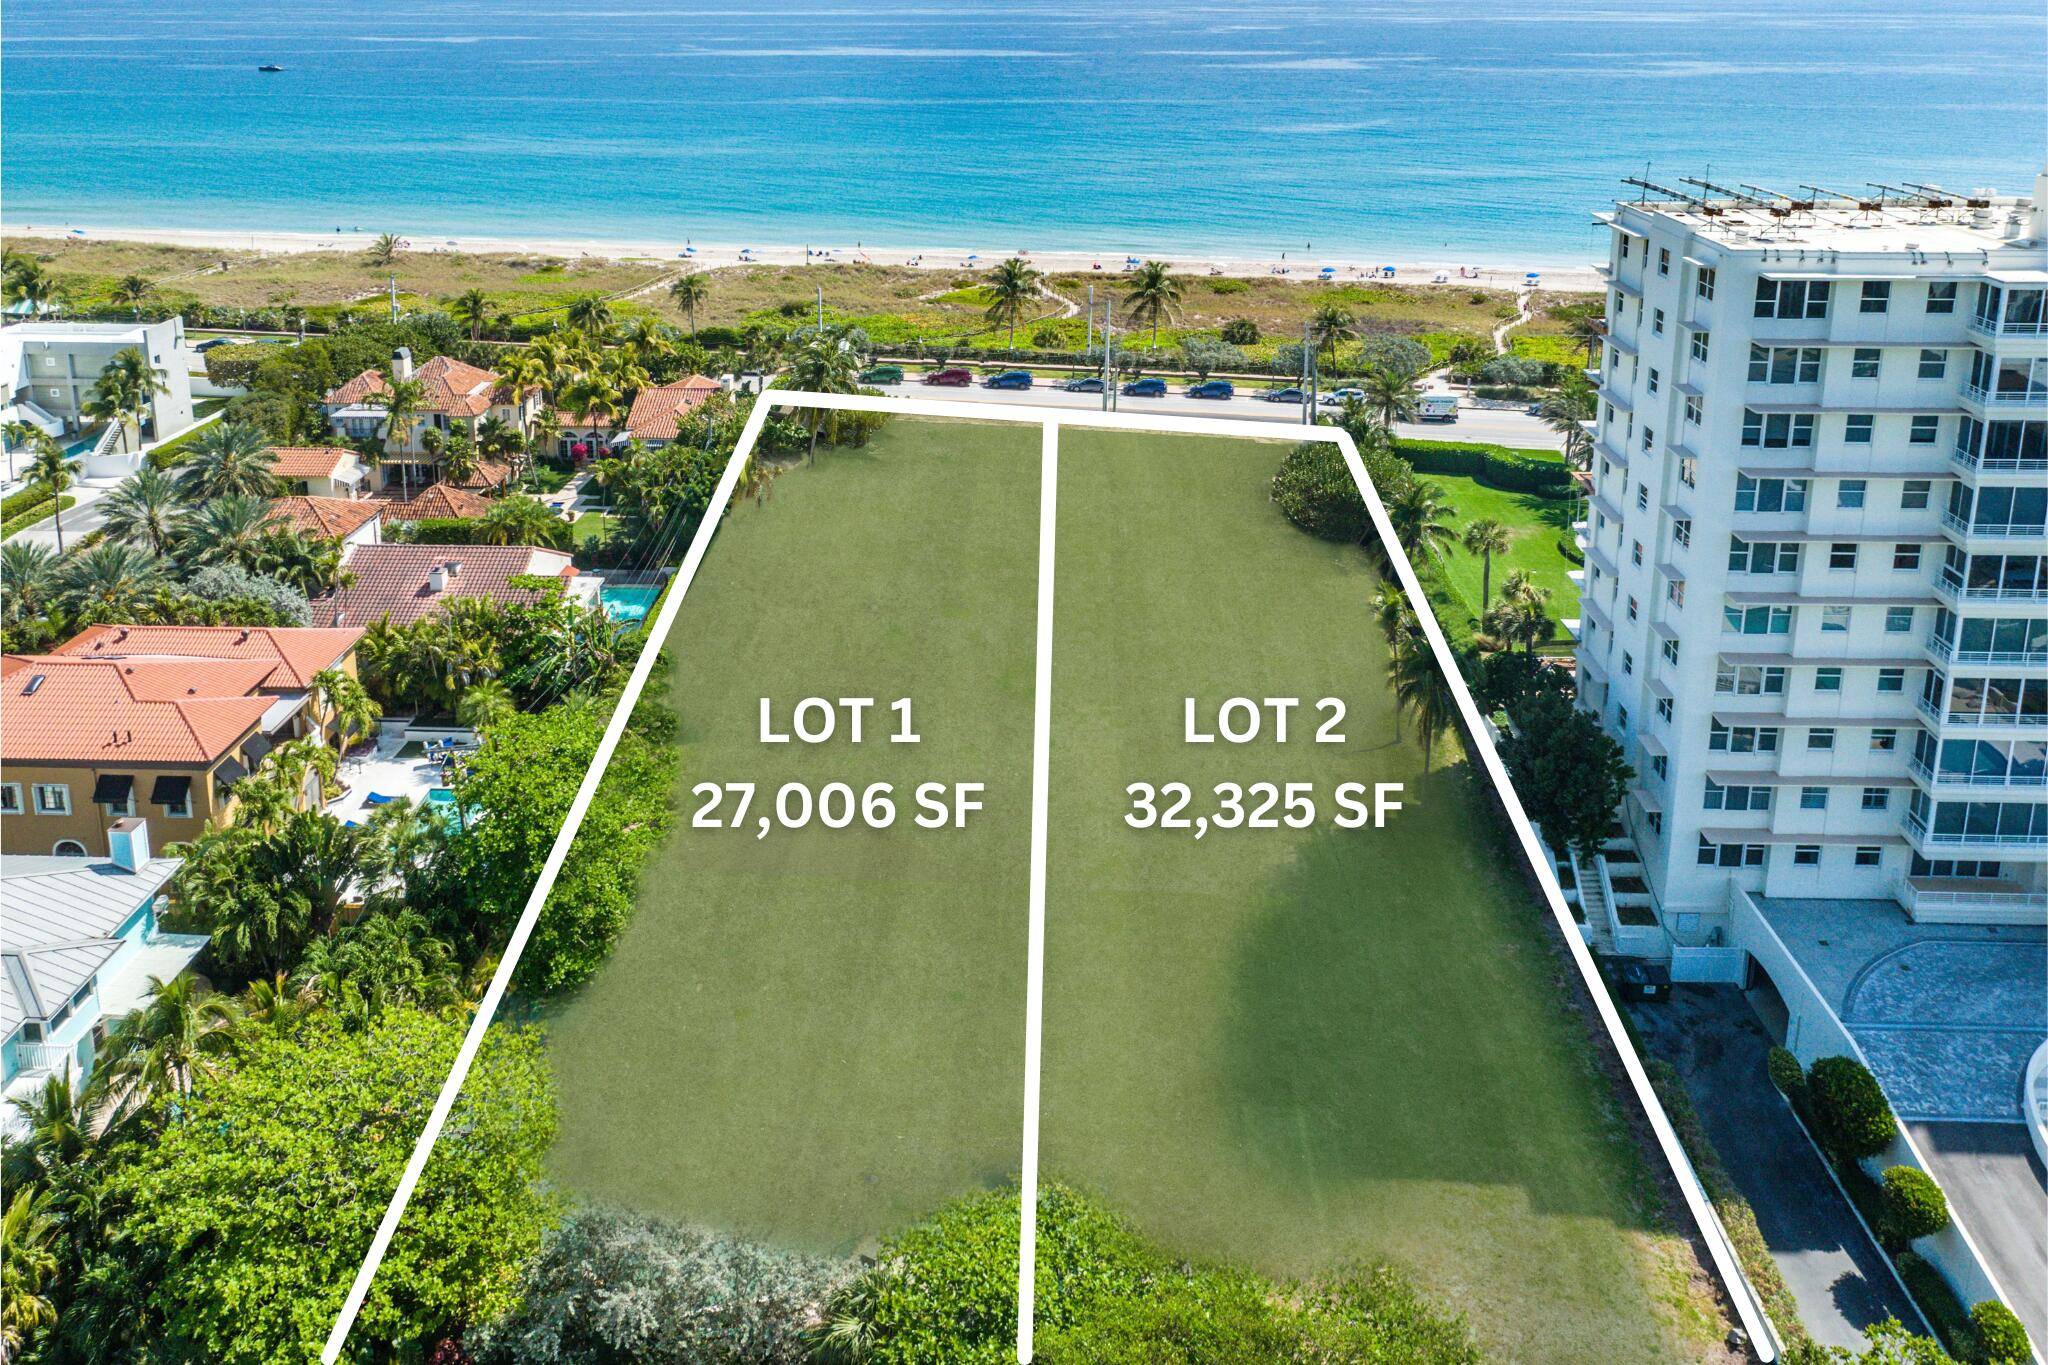 One of the last remaining undeveloped west side oceanfront lots along AIA in Delray Beach offering the discerning buyer a magnificent opportunity to create that one of a kind beach ...